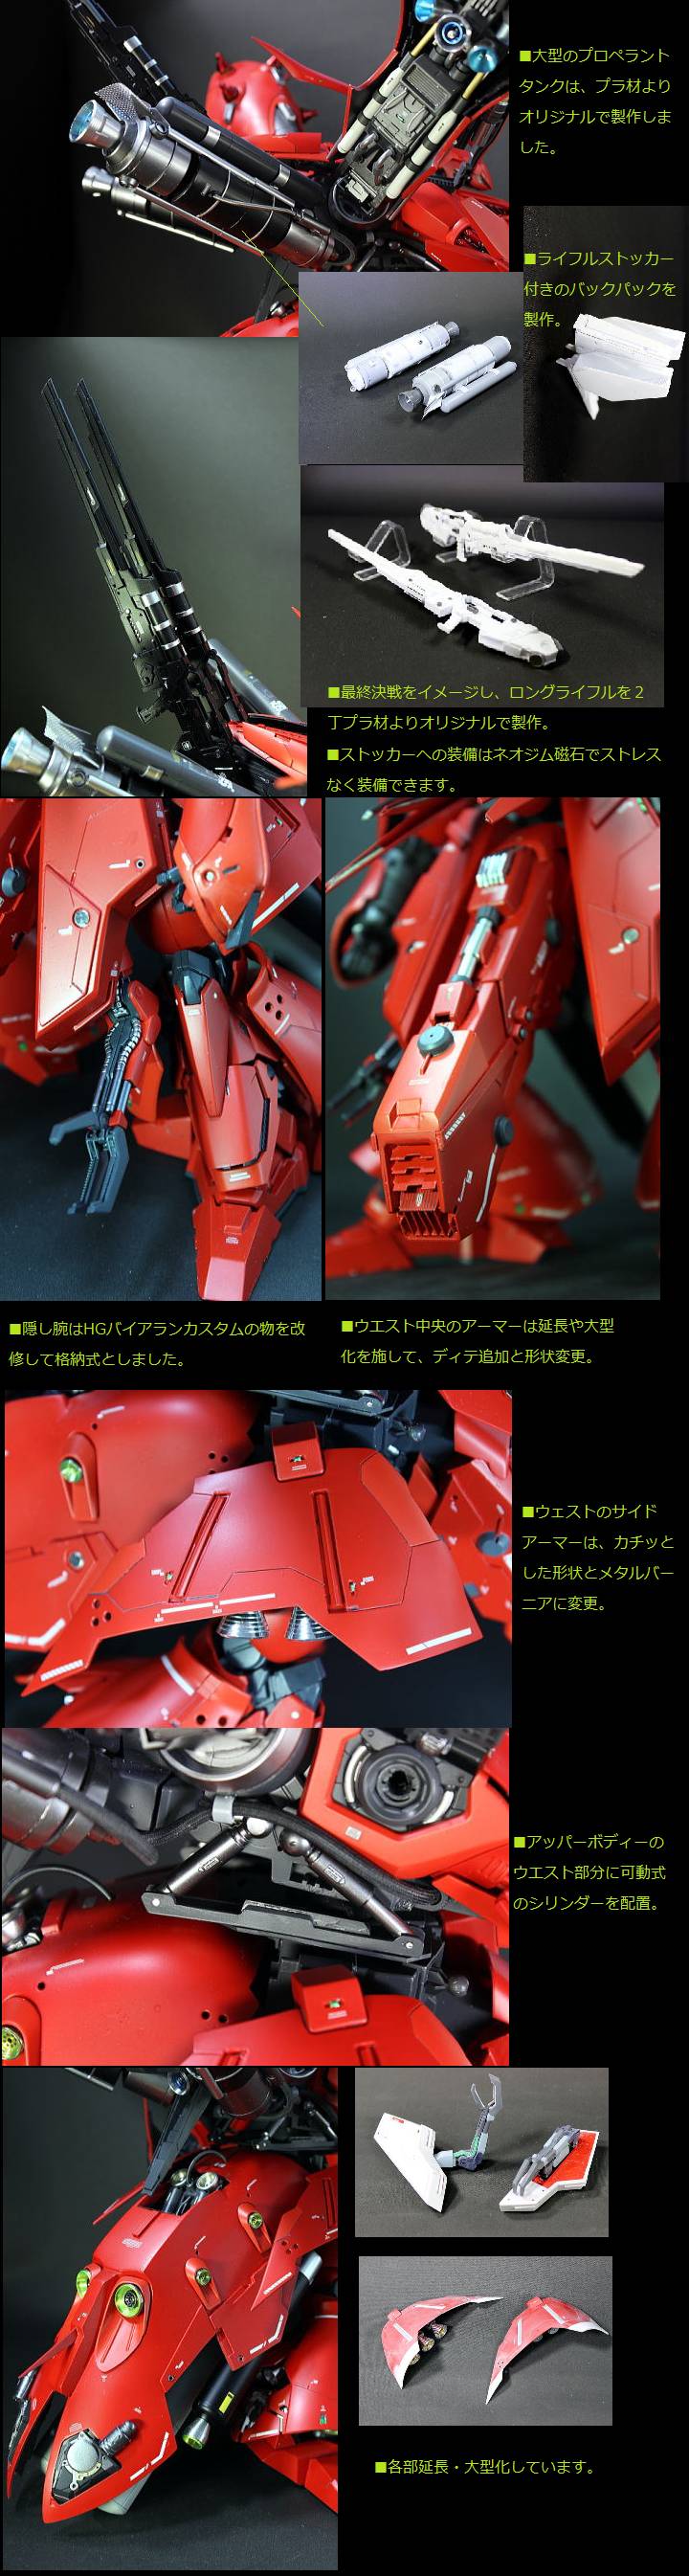 G-REMODELING's RE/100 NIGHTINGALE II THE LAST BATTLE: Amazing Work. Full REVIEW, INFO